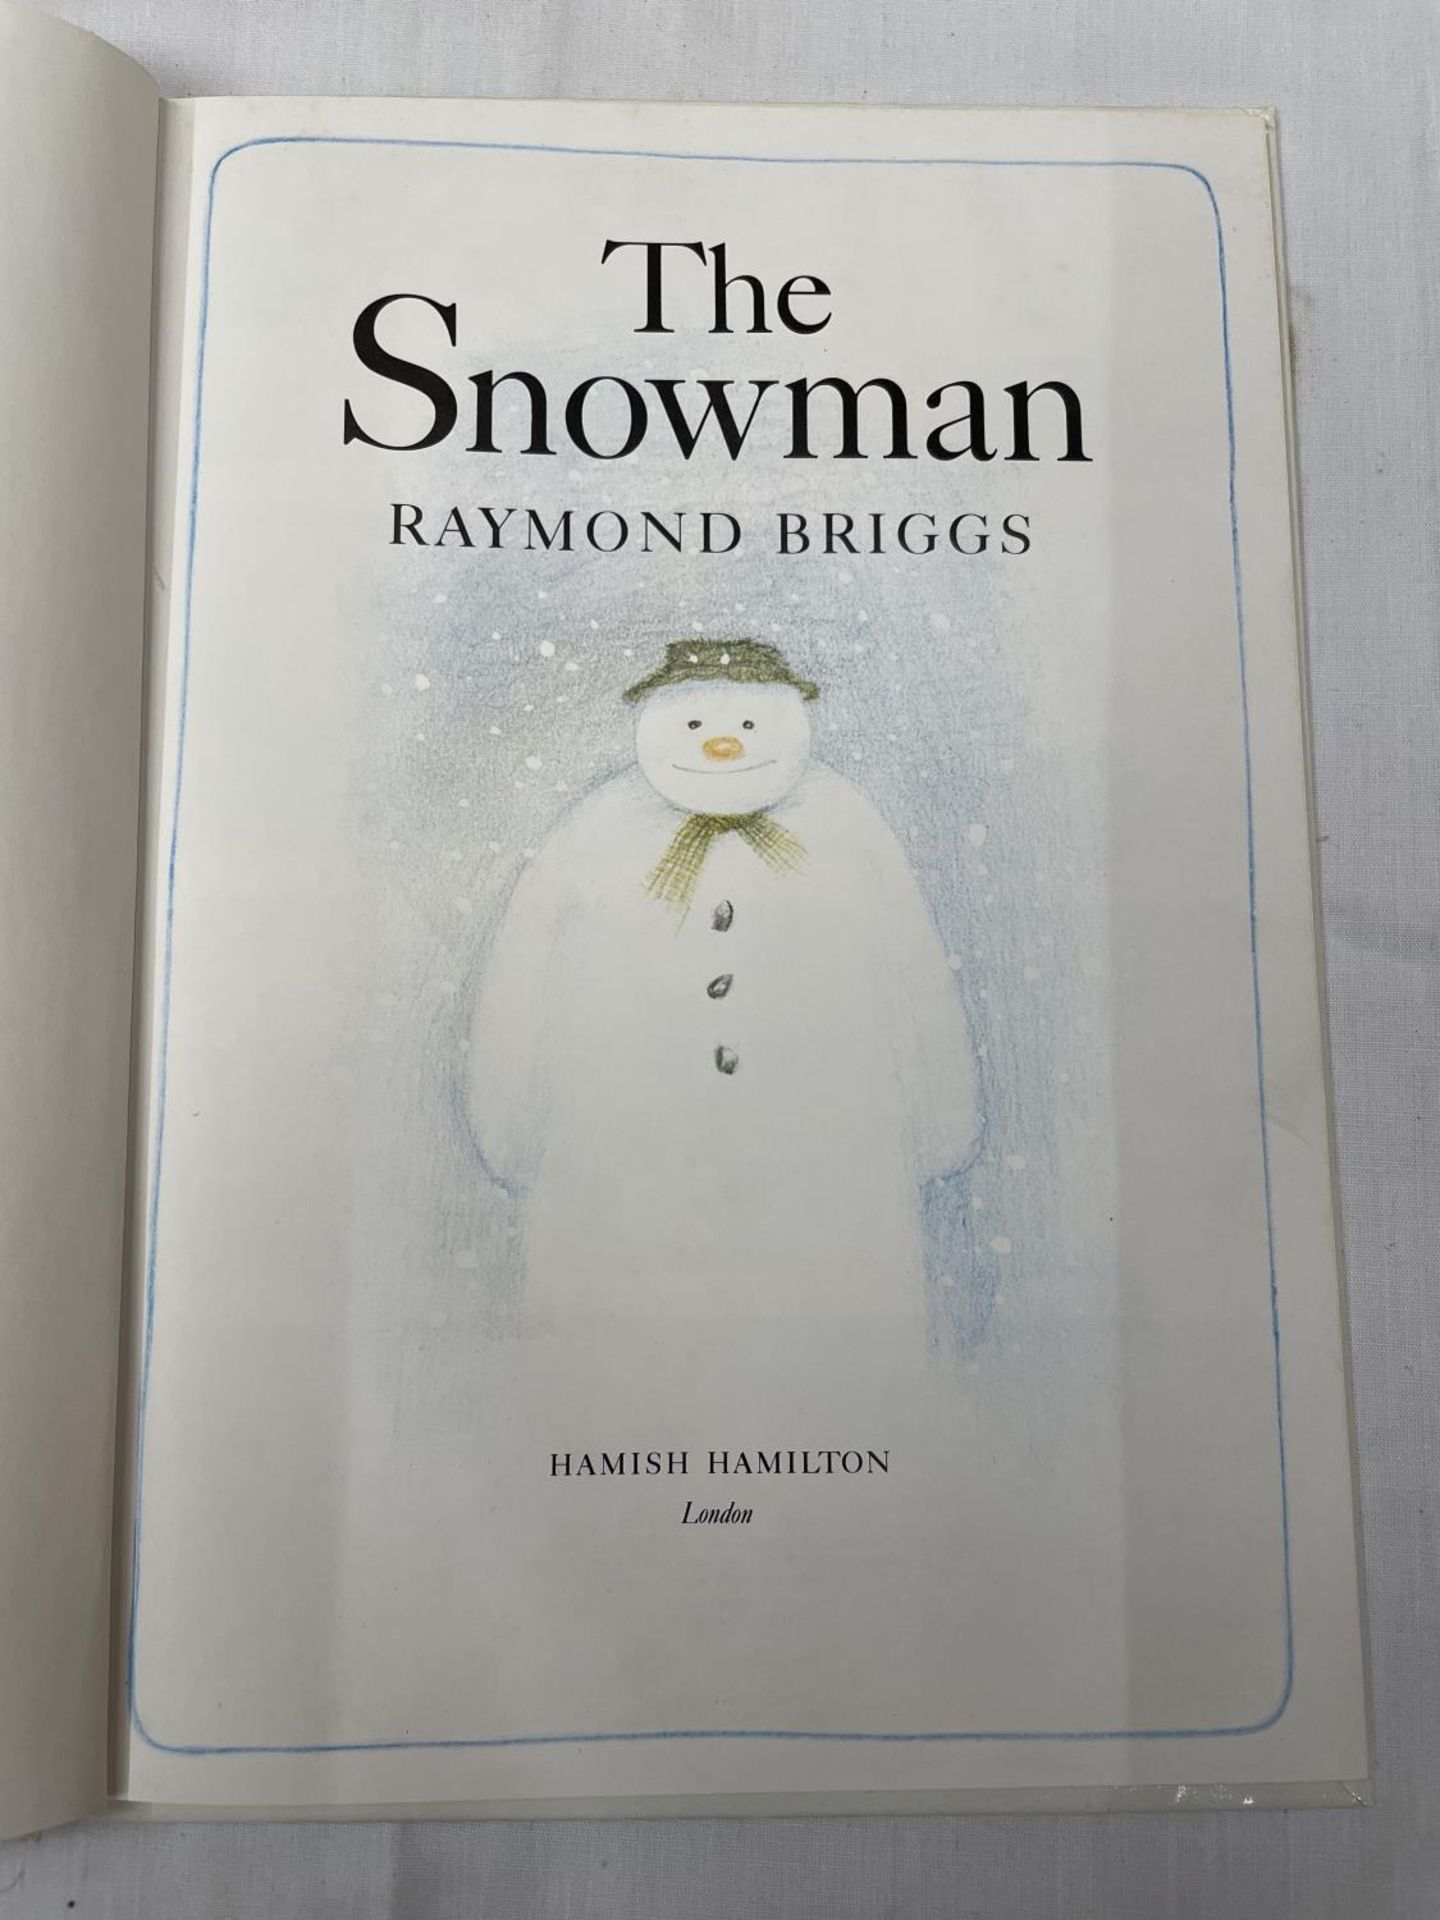 THE SNOWMAN BOOK BY RAYMOND BRIGGS - Image 2 of 3